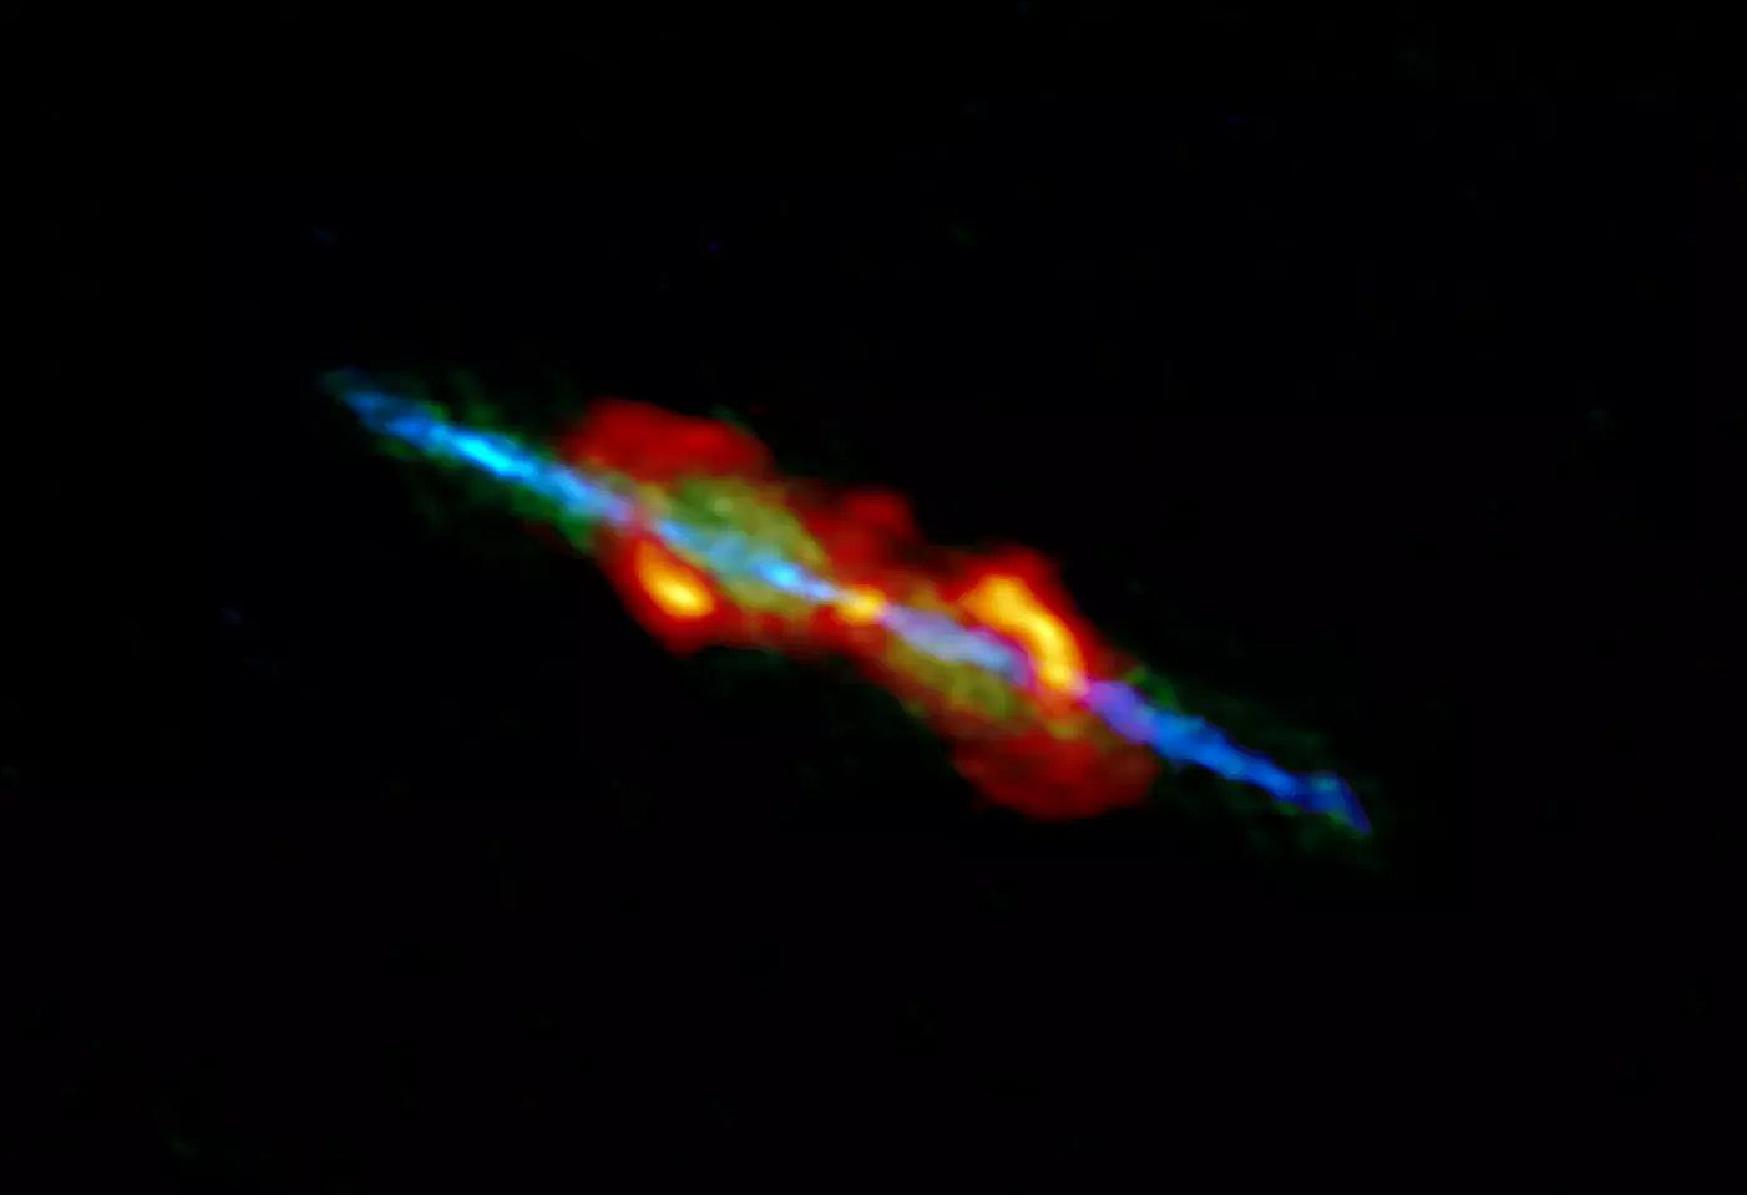 Figure 67: ALMA image of the old star system W43A. The high velocity bipolar jets ejected from the central aged star are seen in blue, low velocity outflow is shown in green, and dusty clouds entrained by the jets are shown in orange (image credit: ALMA (ESO/NAOJ/NRAO), Tafoya et al.)